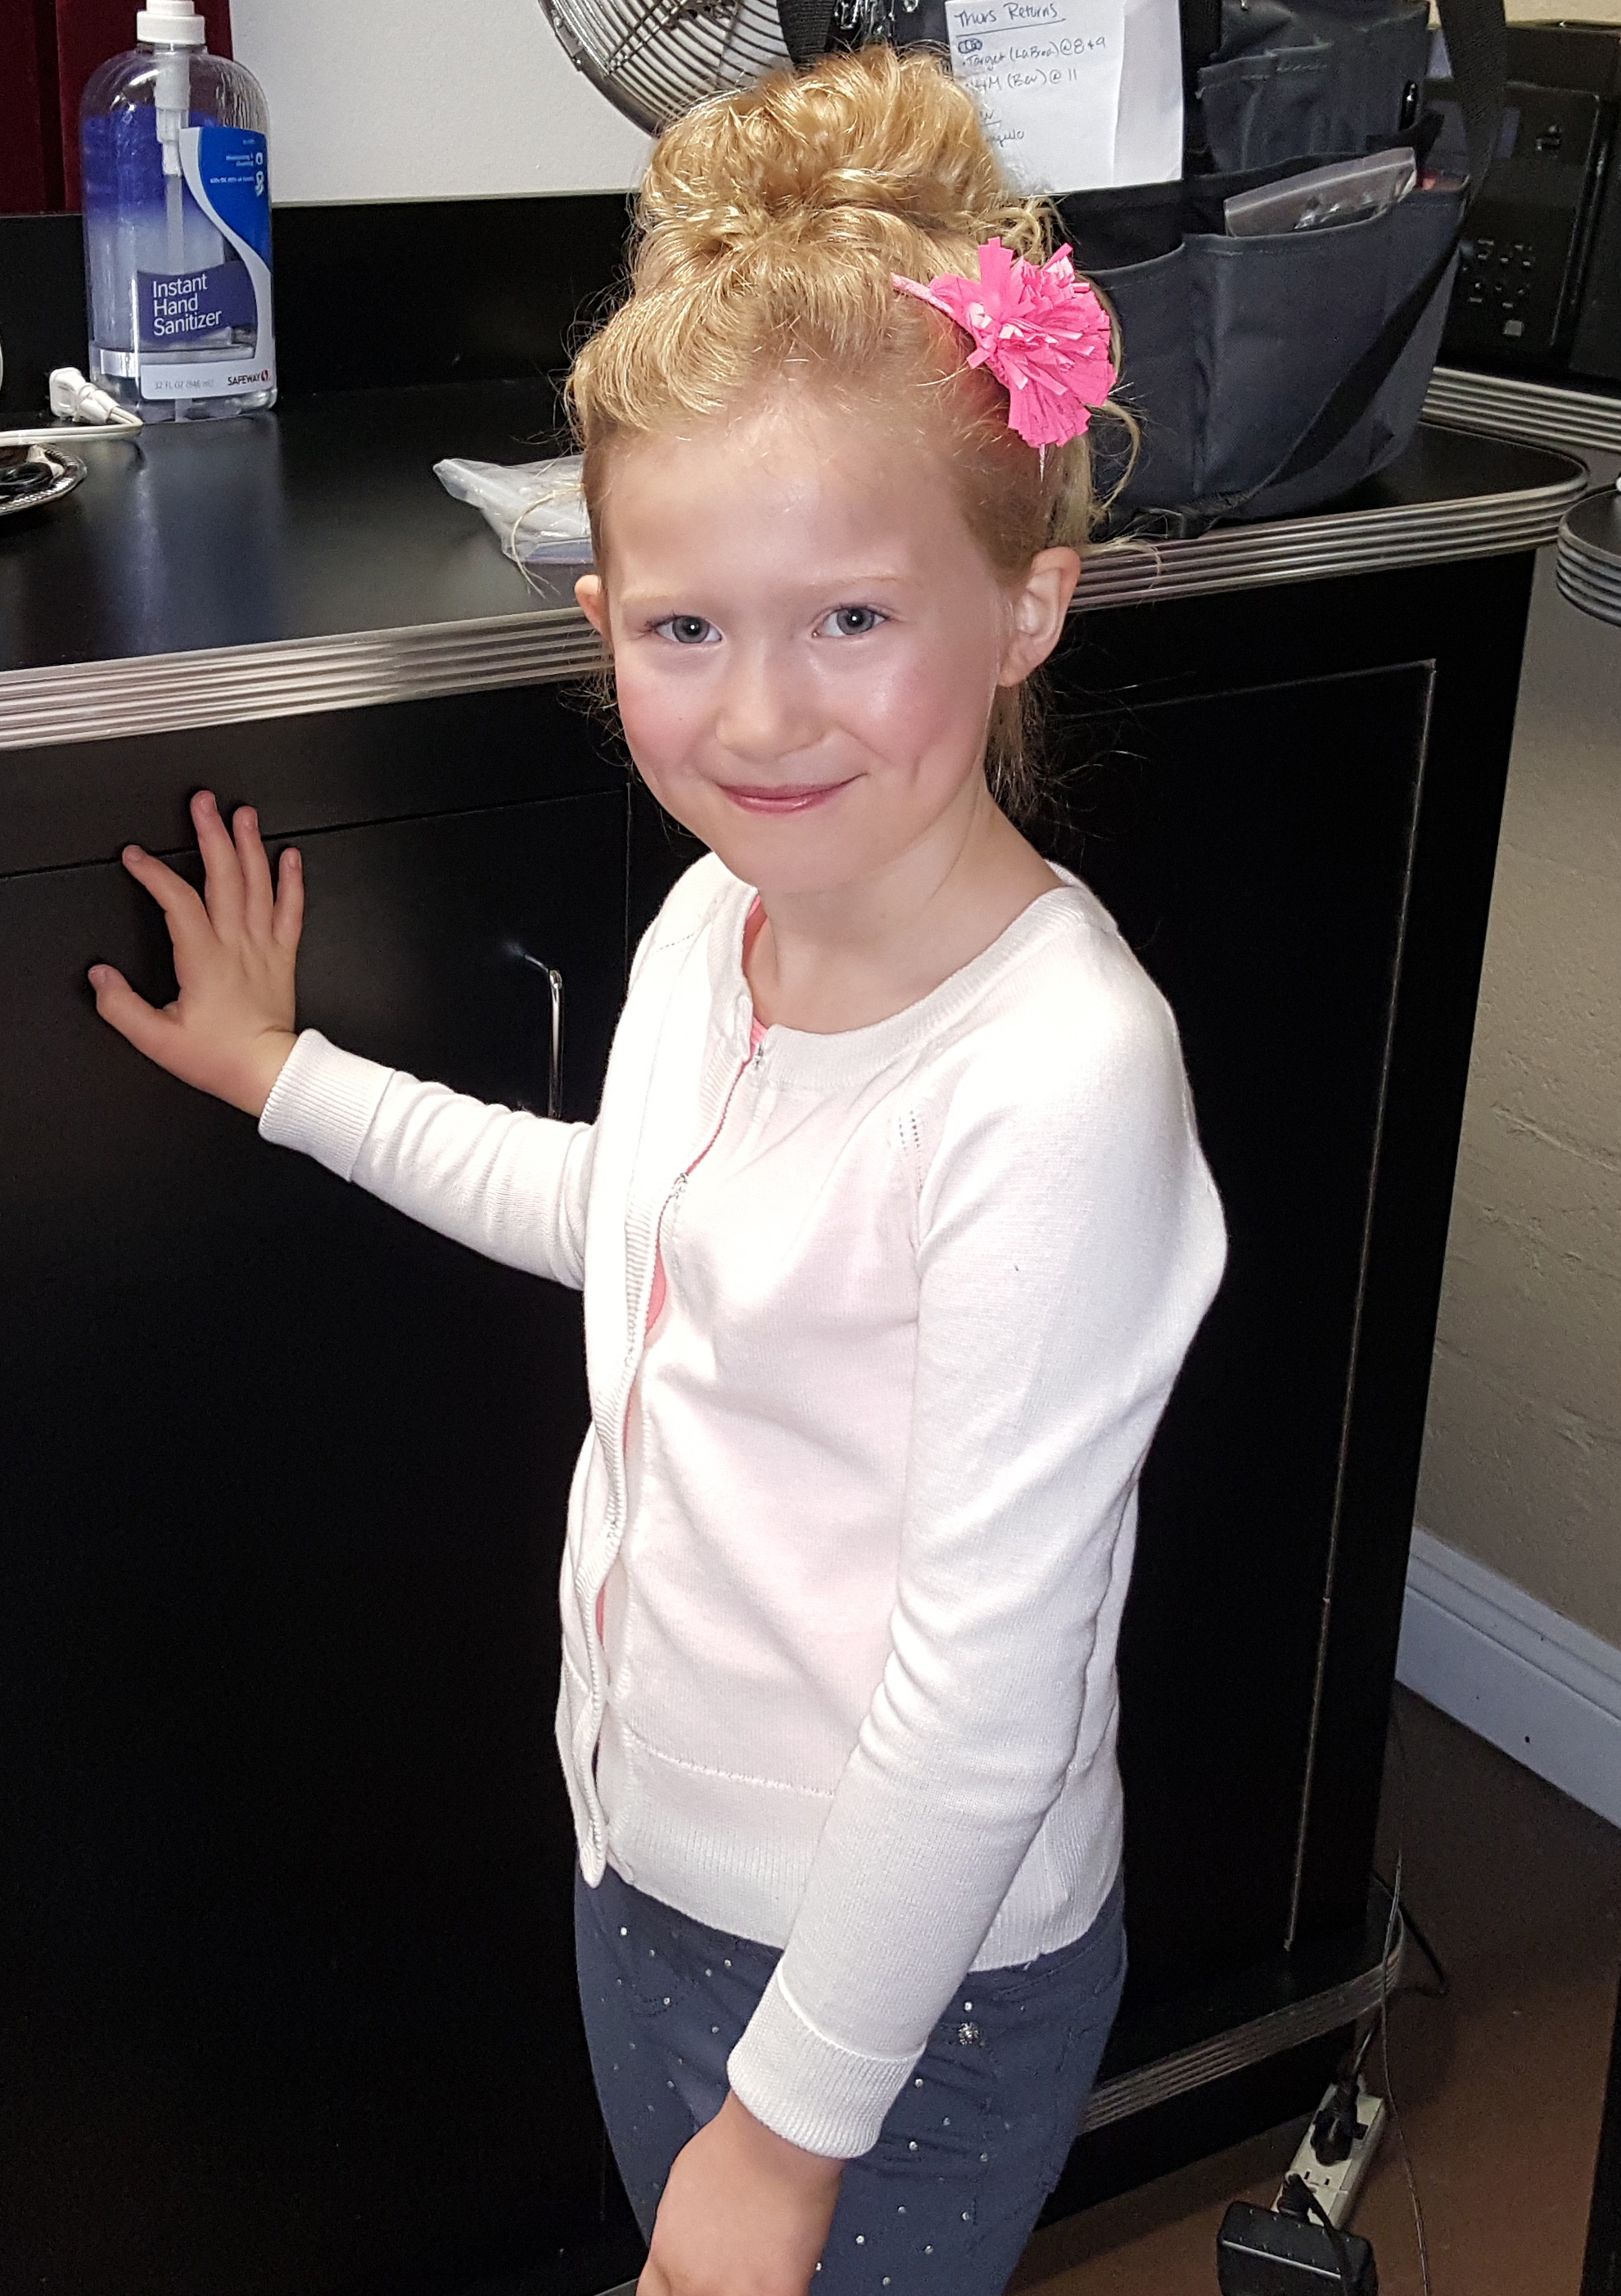 Abigail Zoe Lewis on set getting ready for the Disney Hasbro print shoot. September 22, 2015. I had an awesome time!